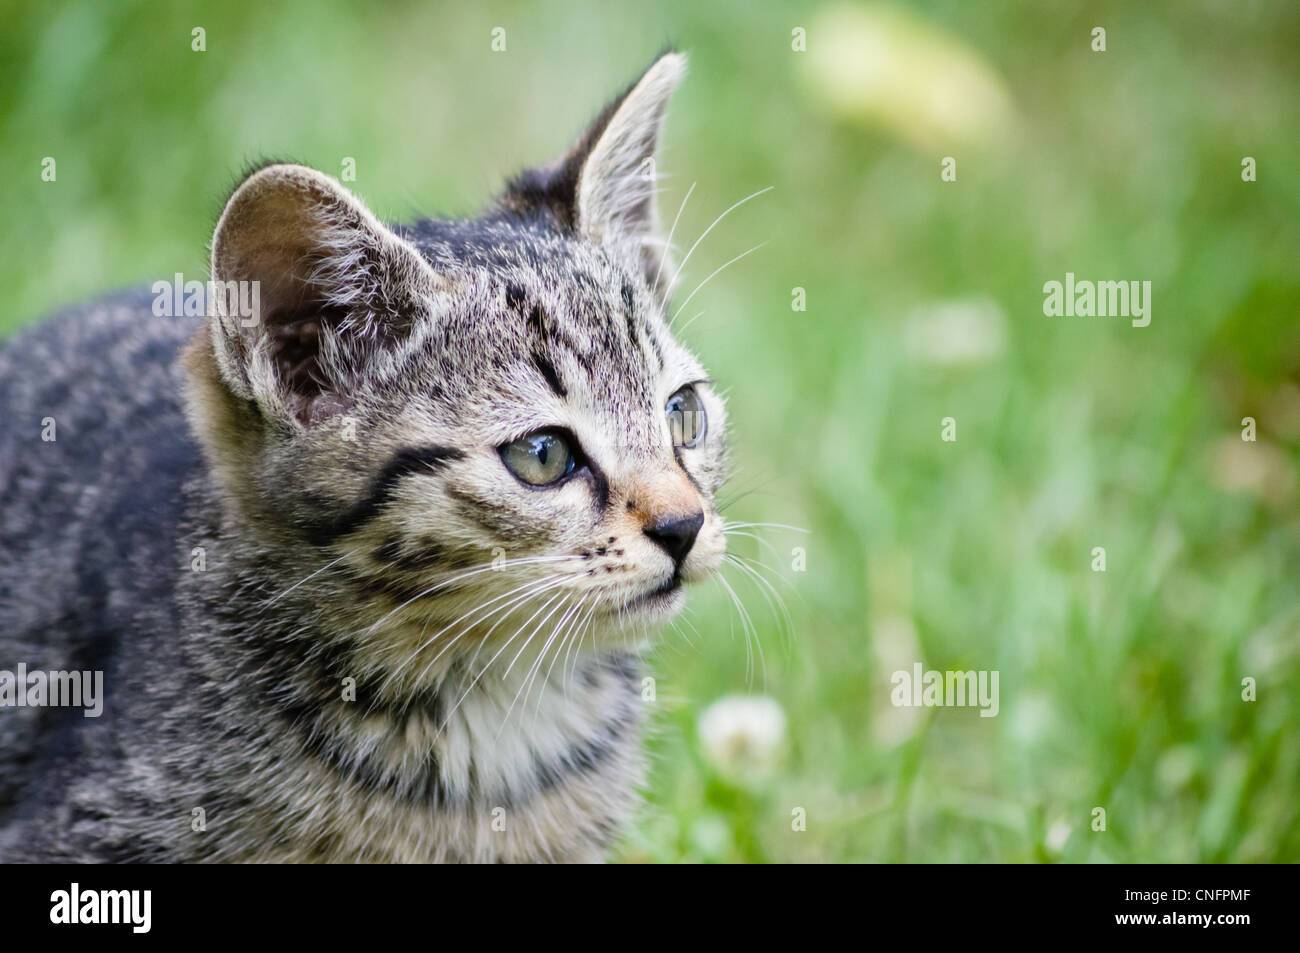 Cats and kittens in the garden. Stock Photo